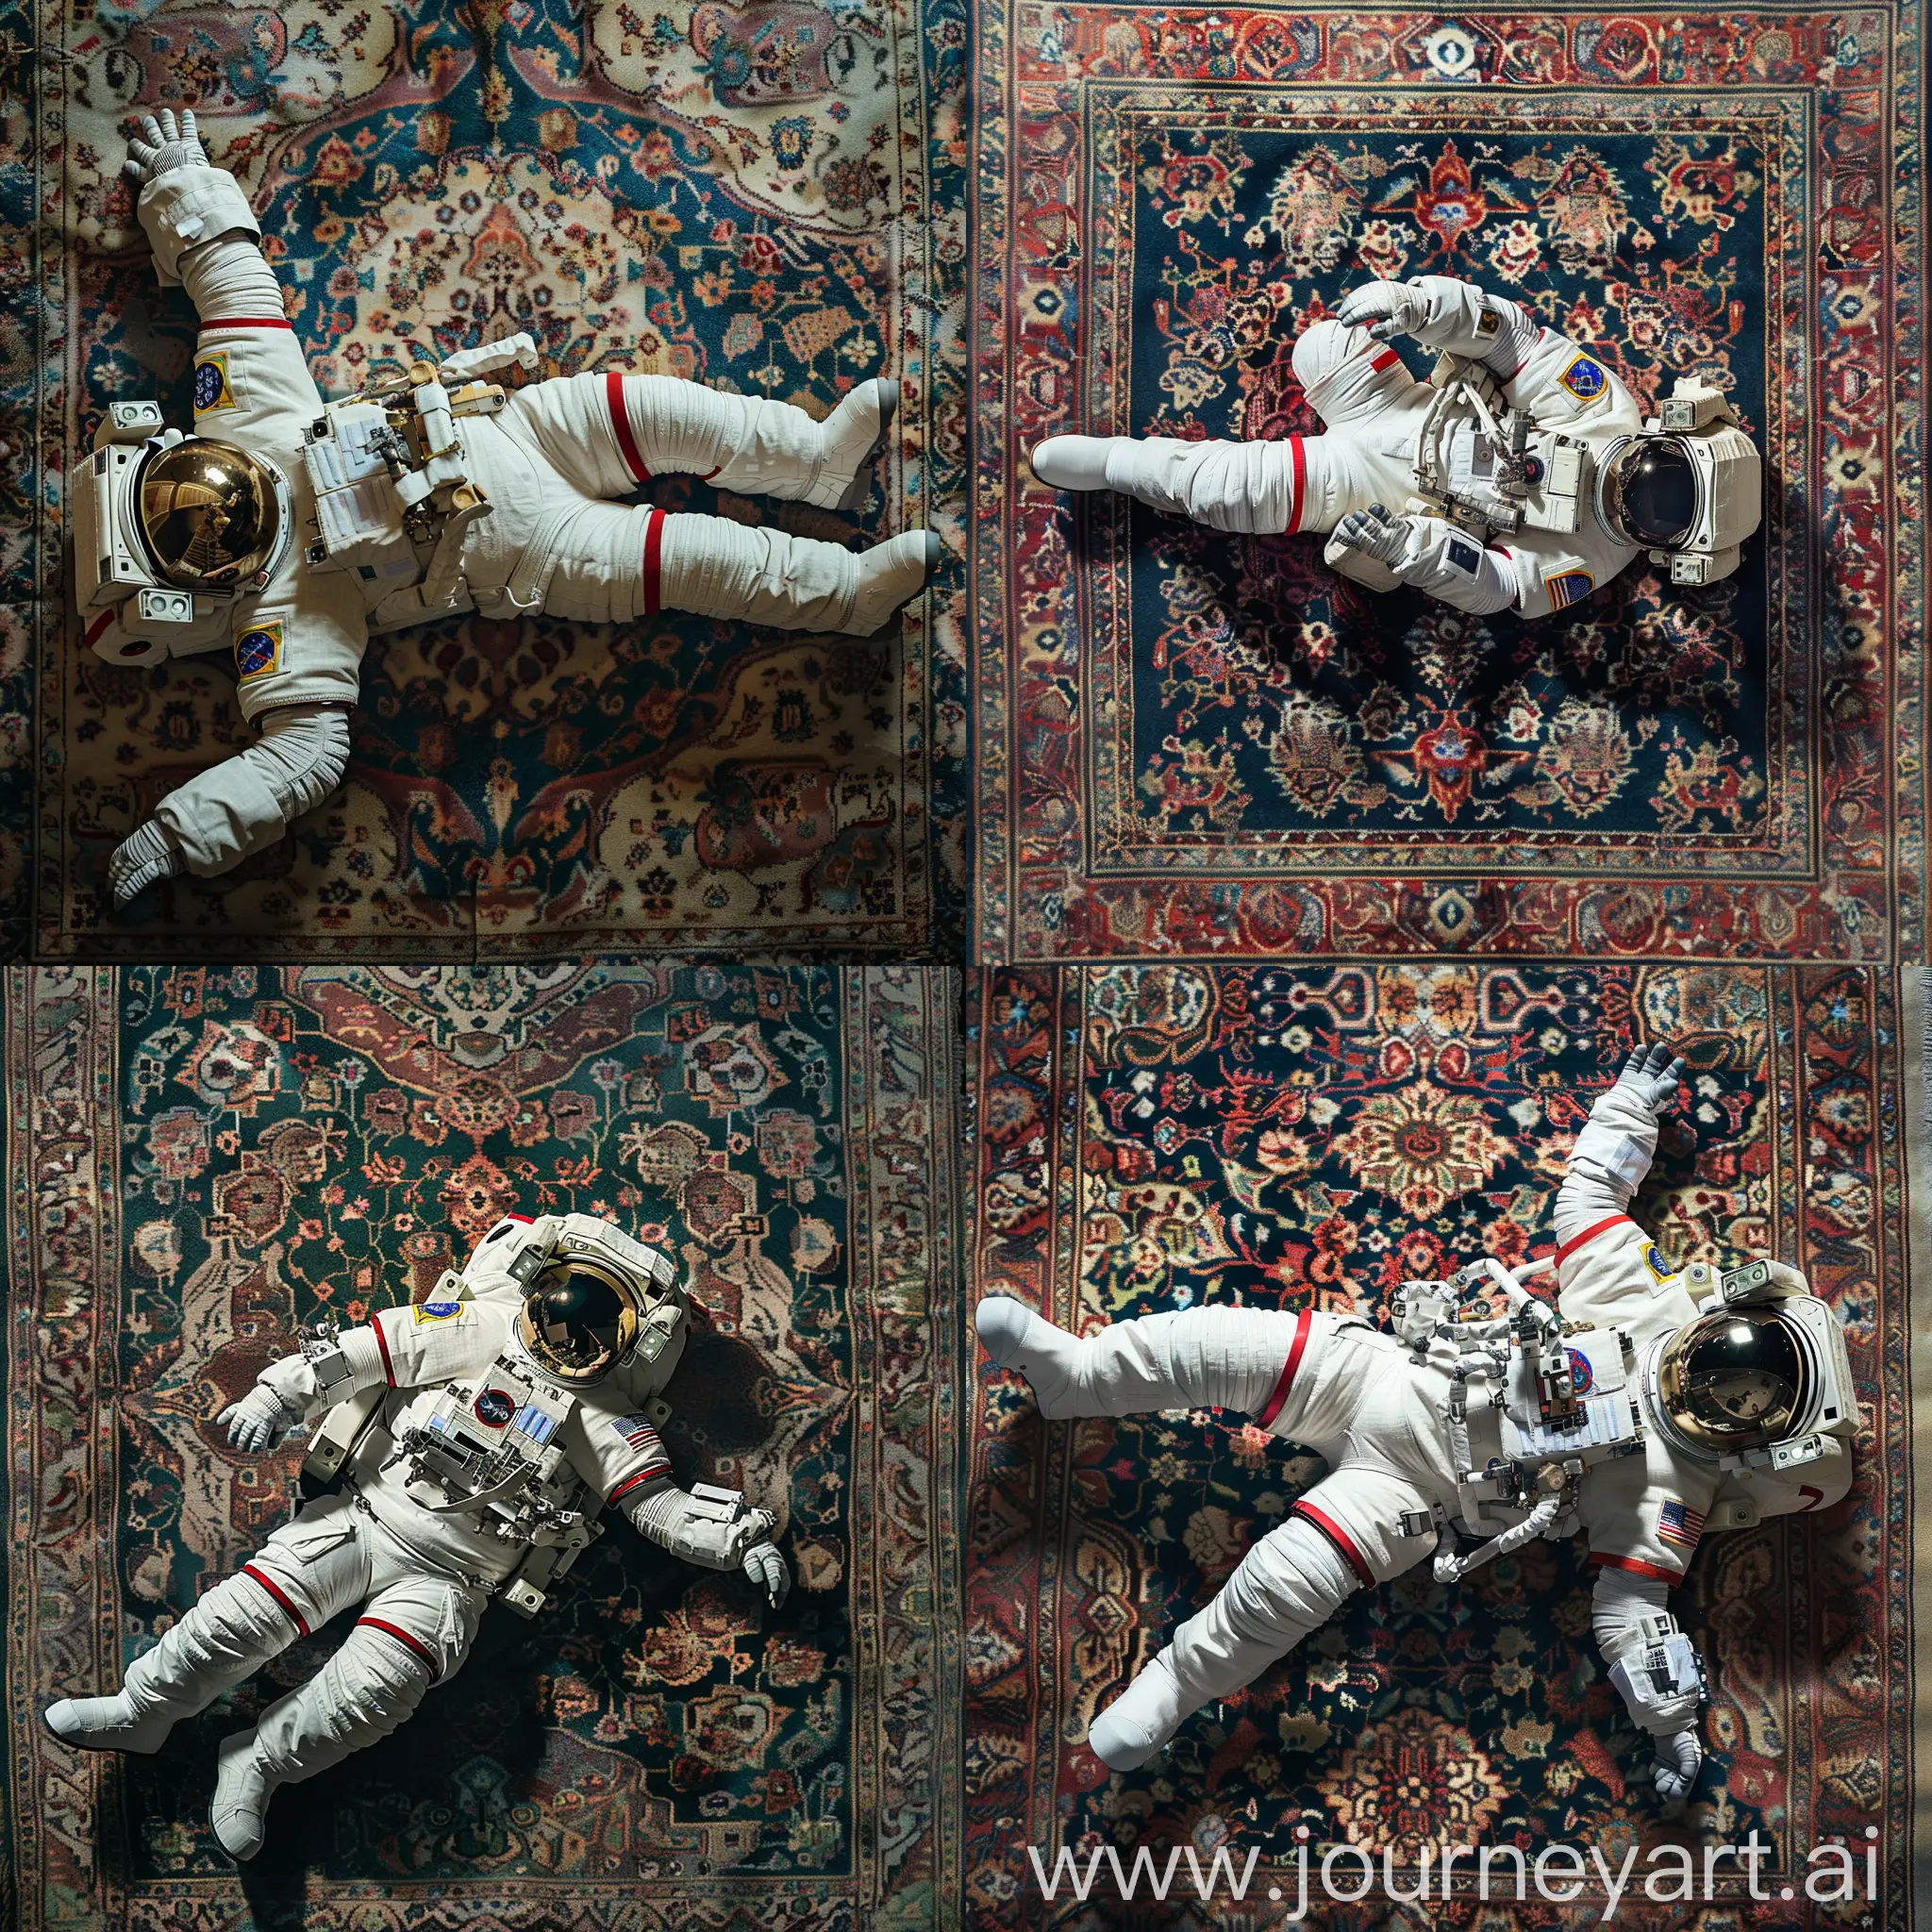 Astronaut-Relaxing-on-Ornate-Persian-Rug-in-Space-High-Resolution-Image